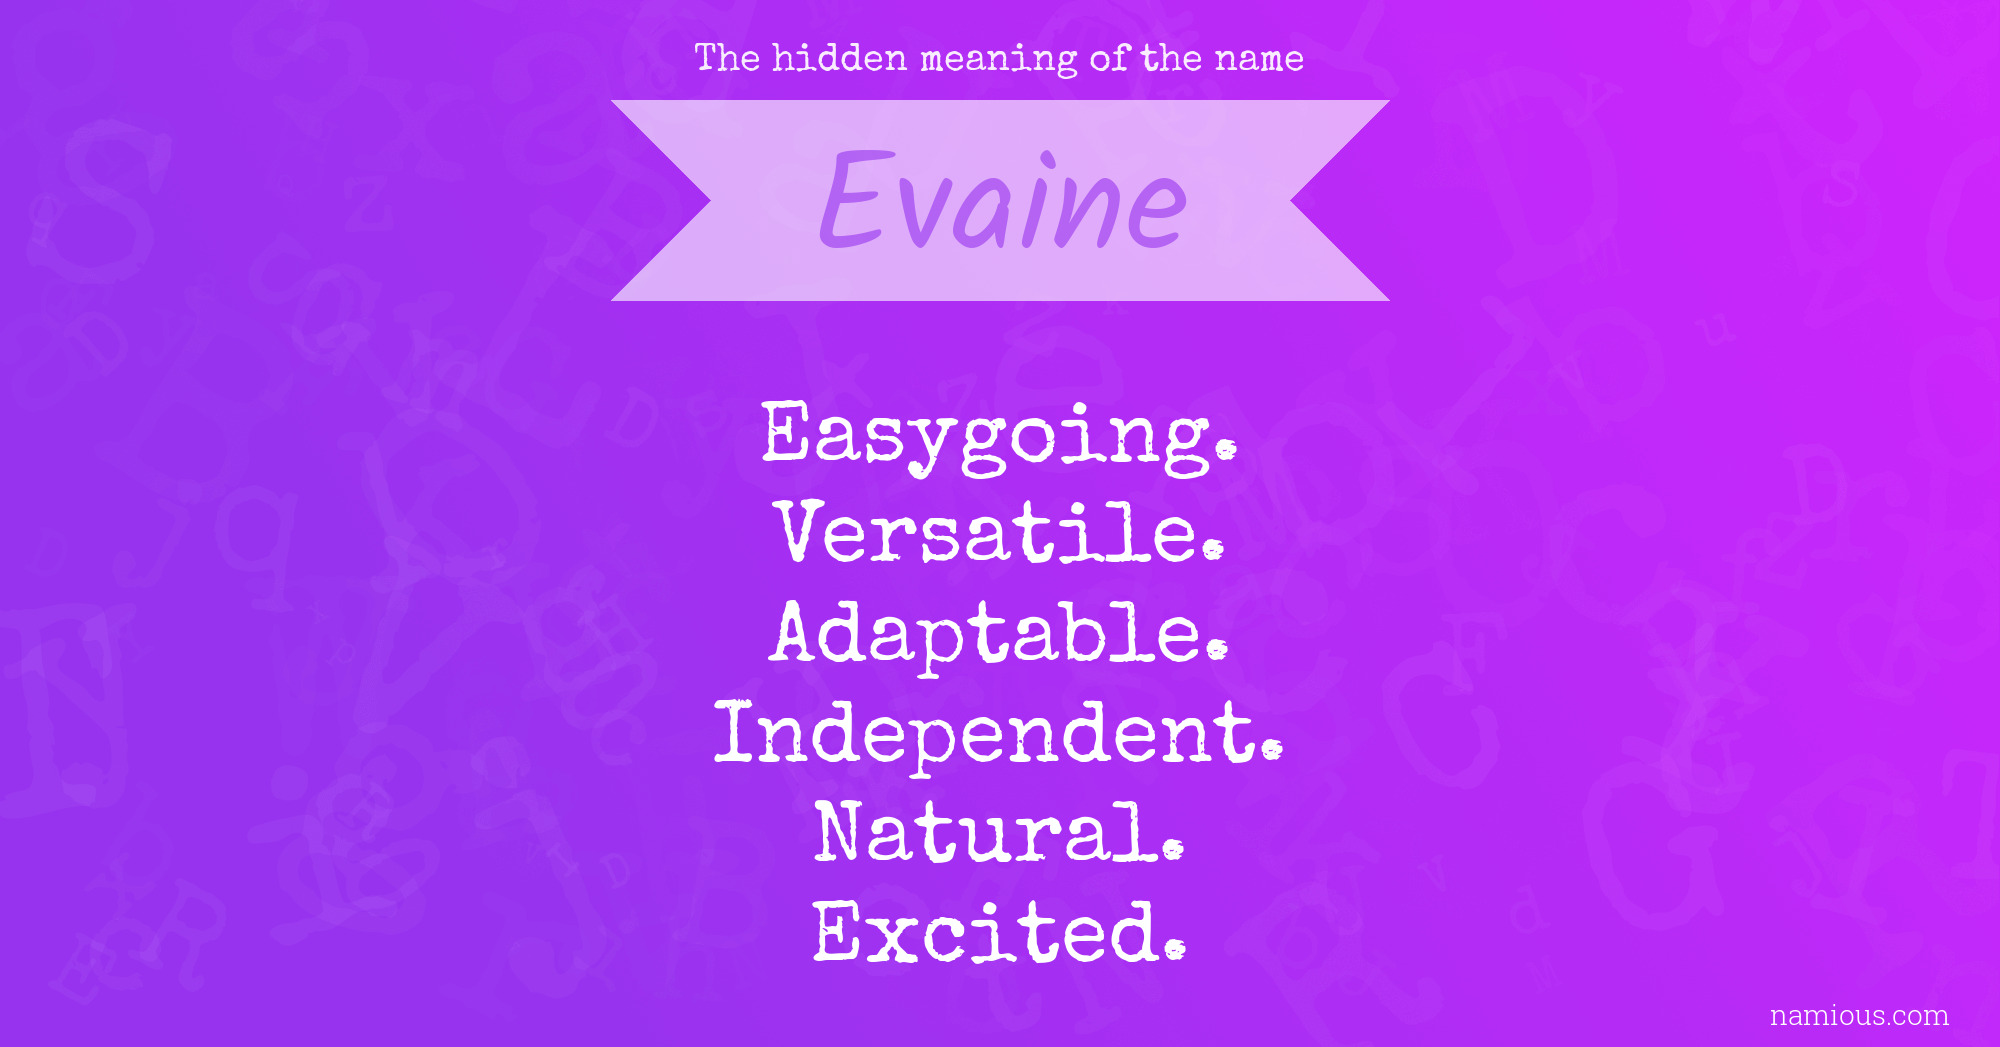 The hidden meaning of the name Evaine